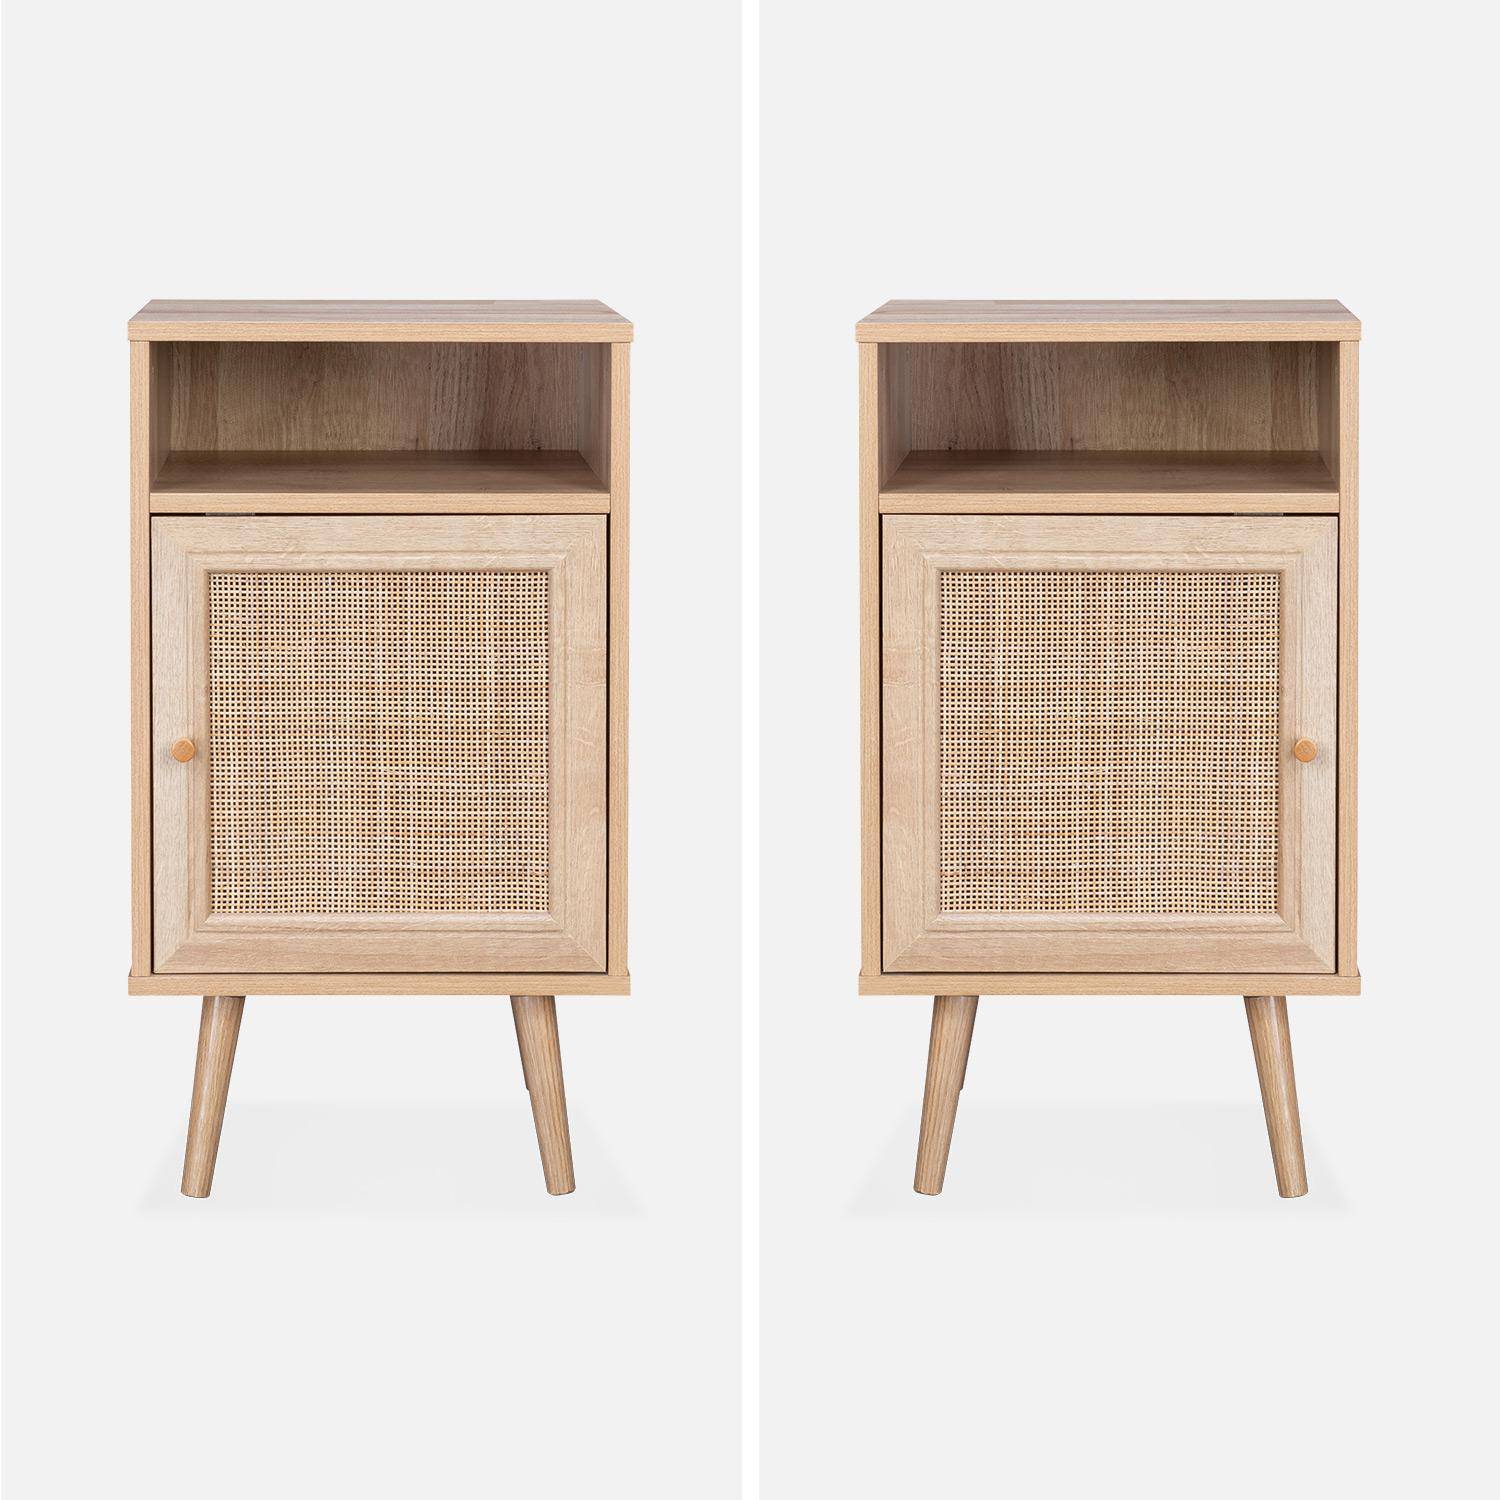 Pair of Scandi-style wood and cane rattan bedside tables with cupboard, 40x39x70cm - Boheme - Natural Wood colour Photo6